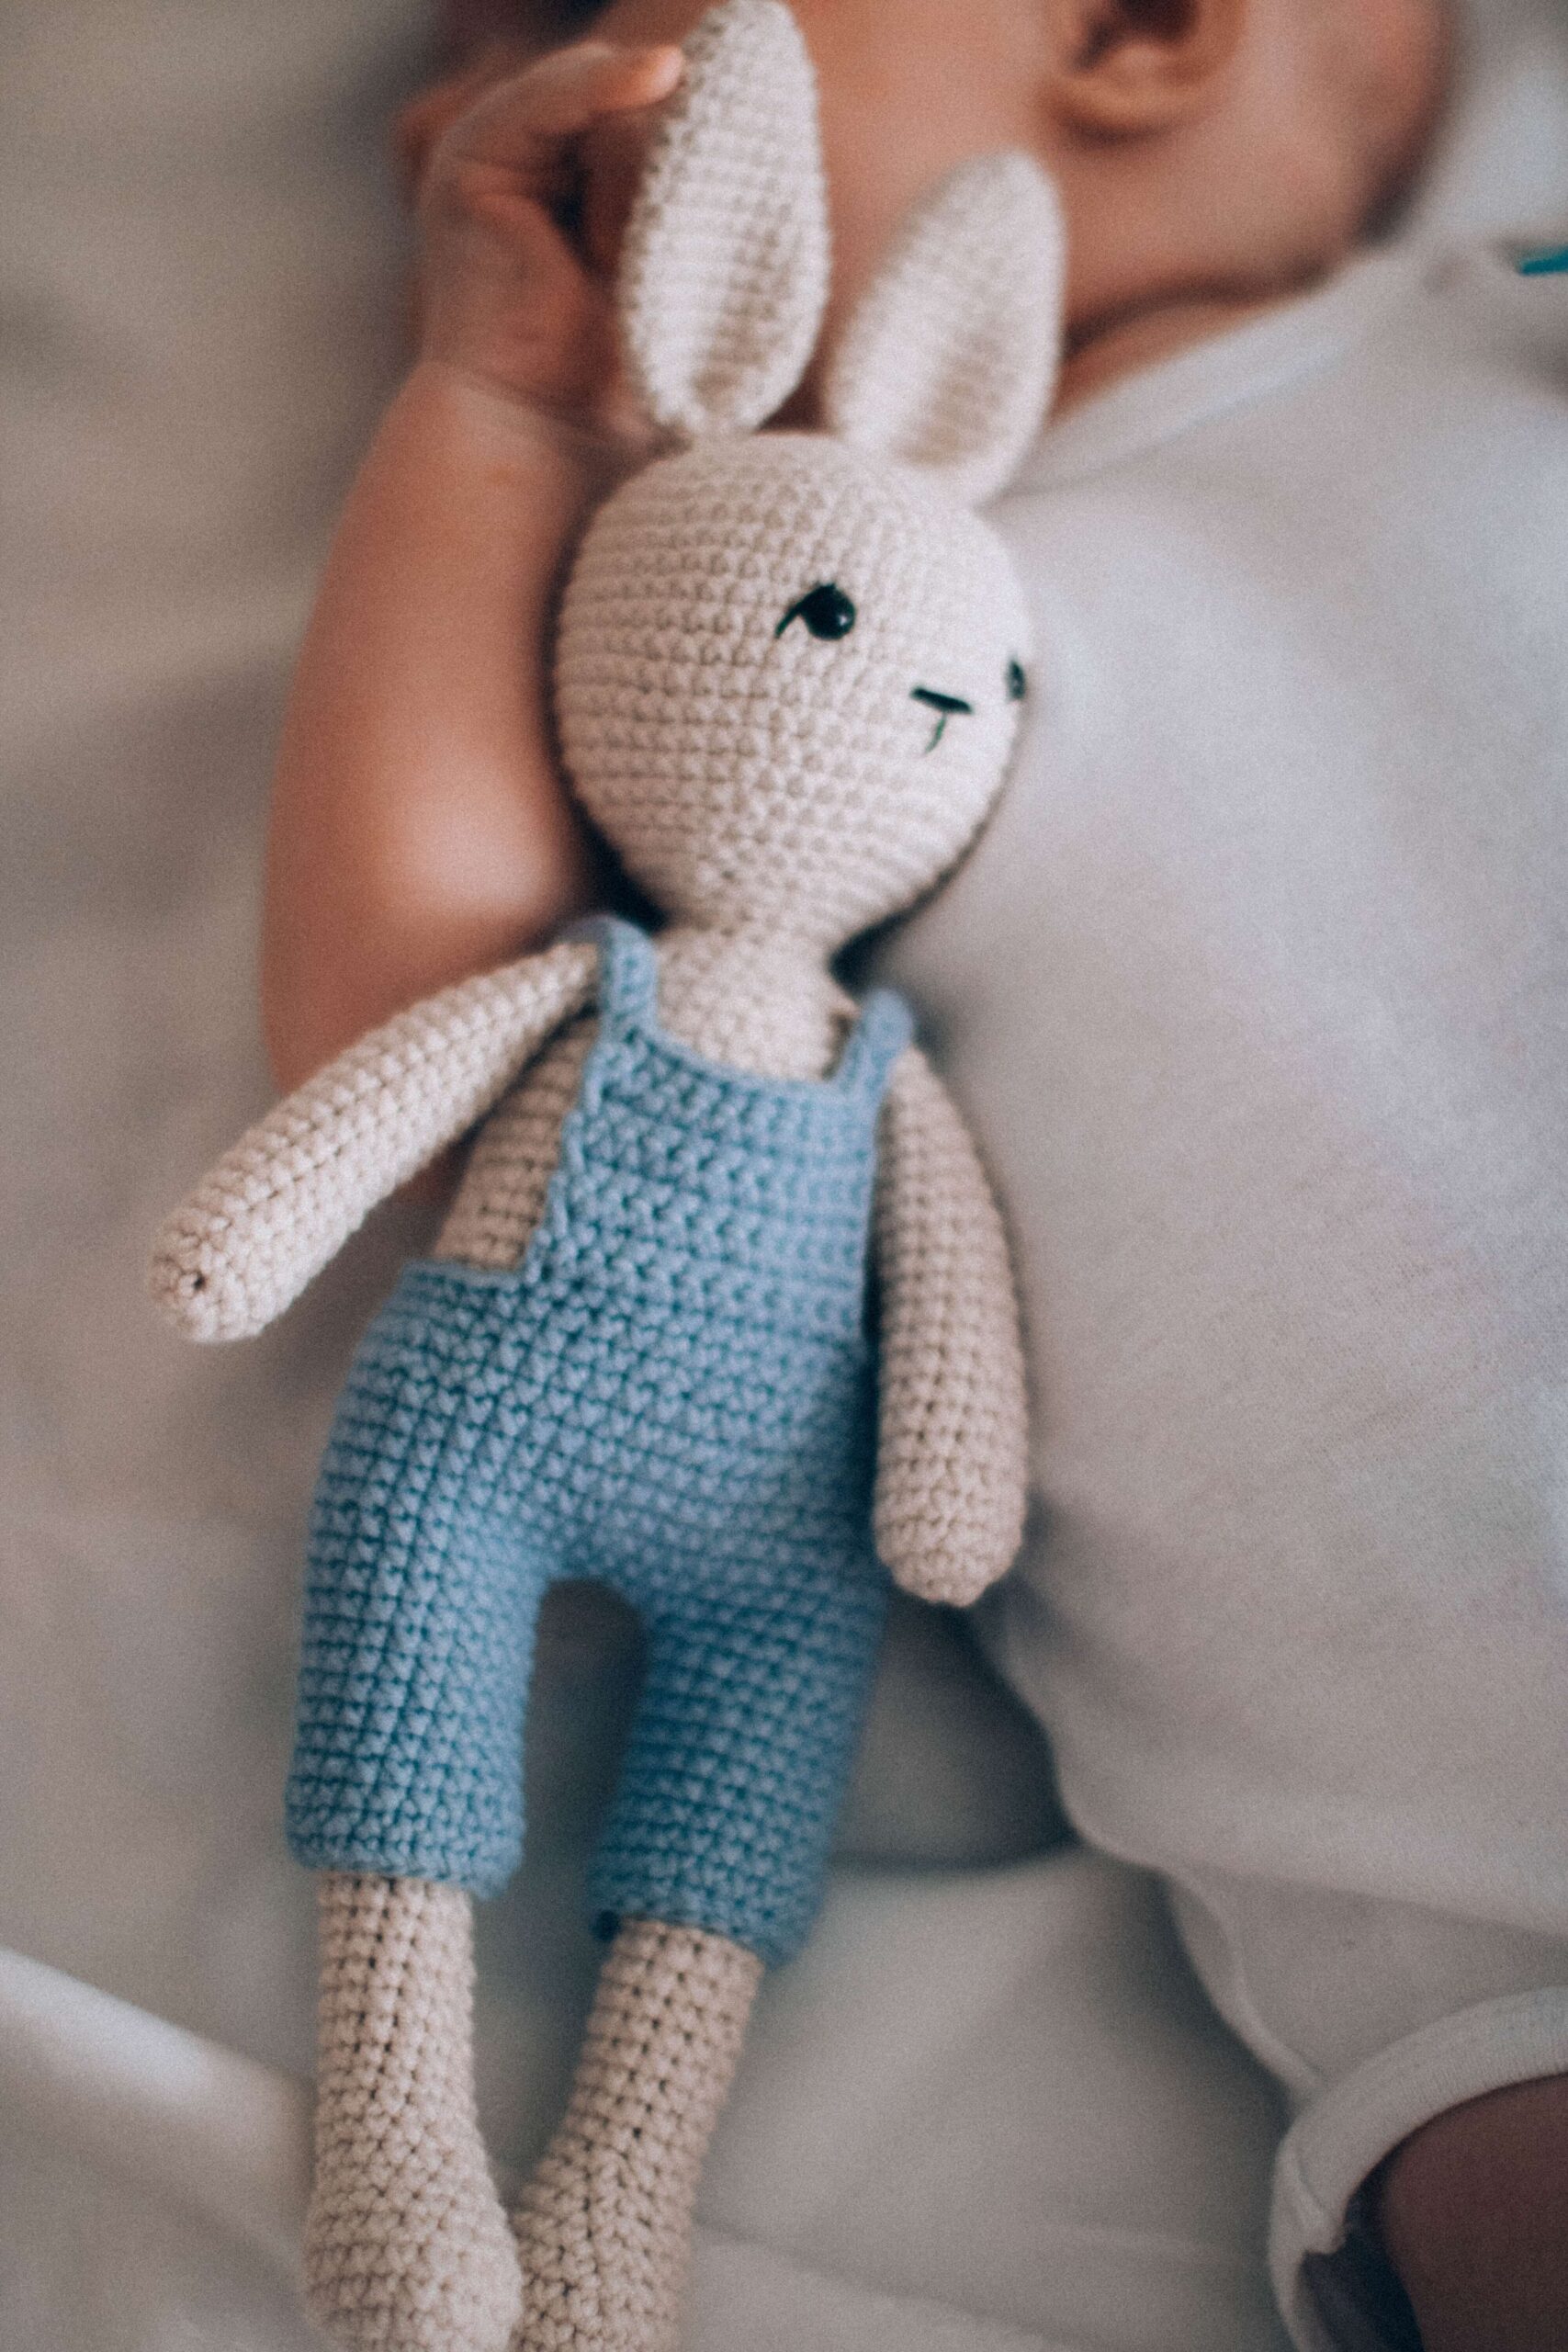 Stuffed rabbit toy in crib with baby